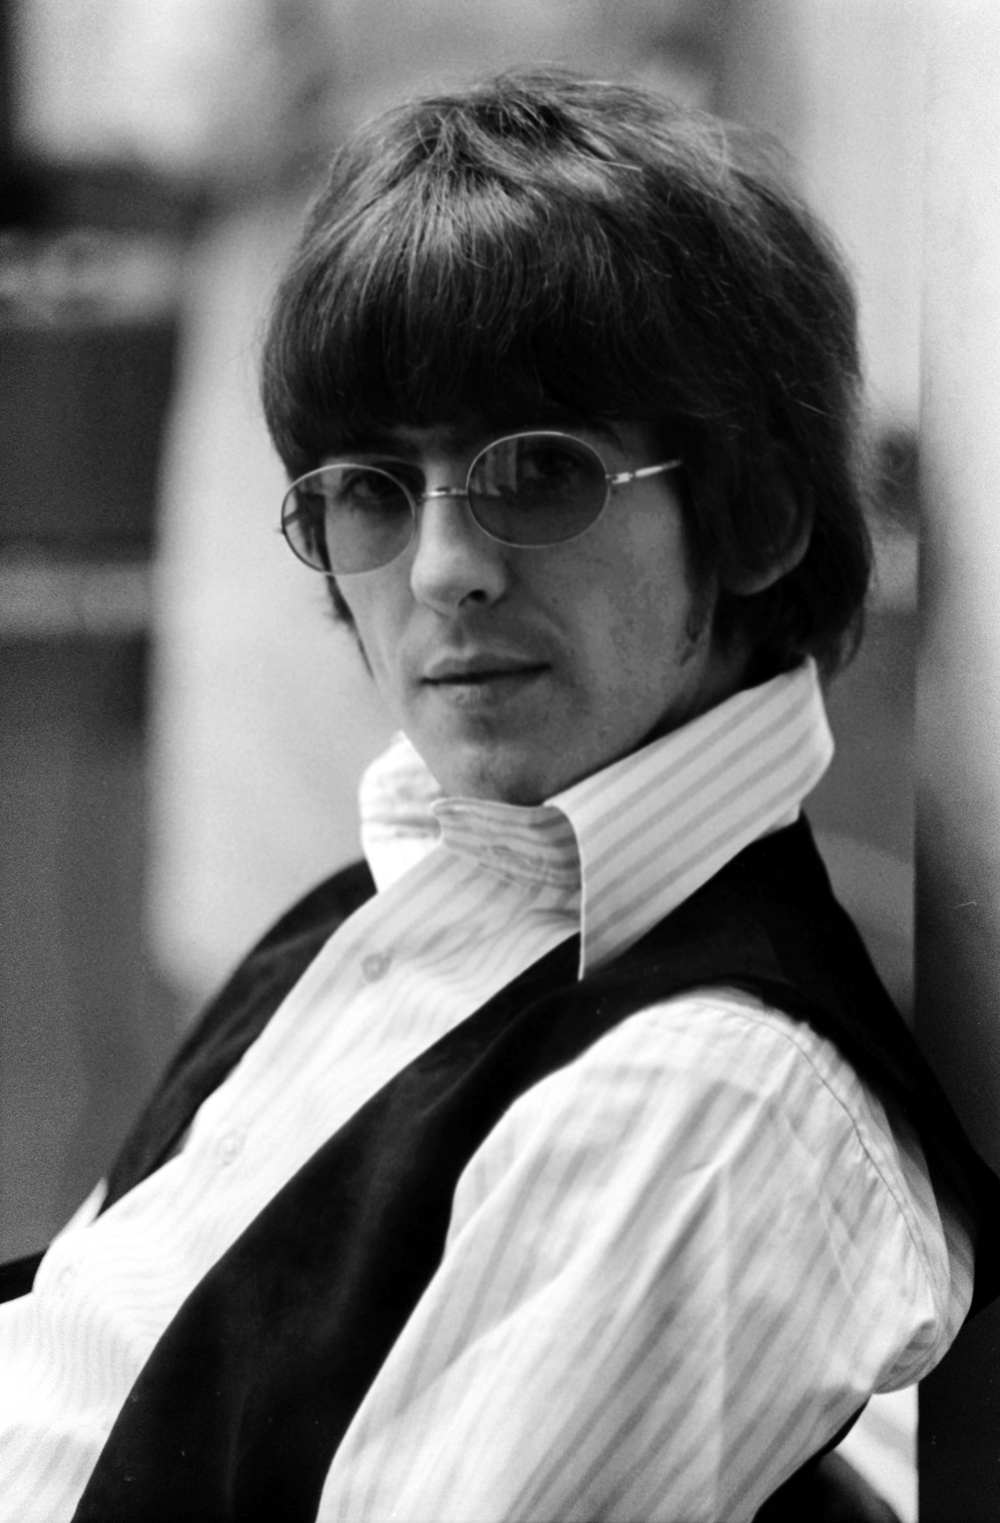 George at Abbey Road studios 